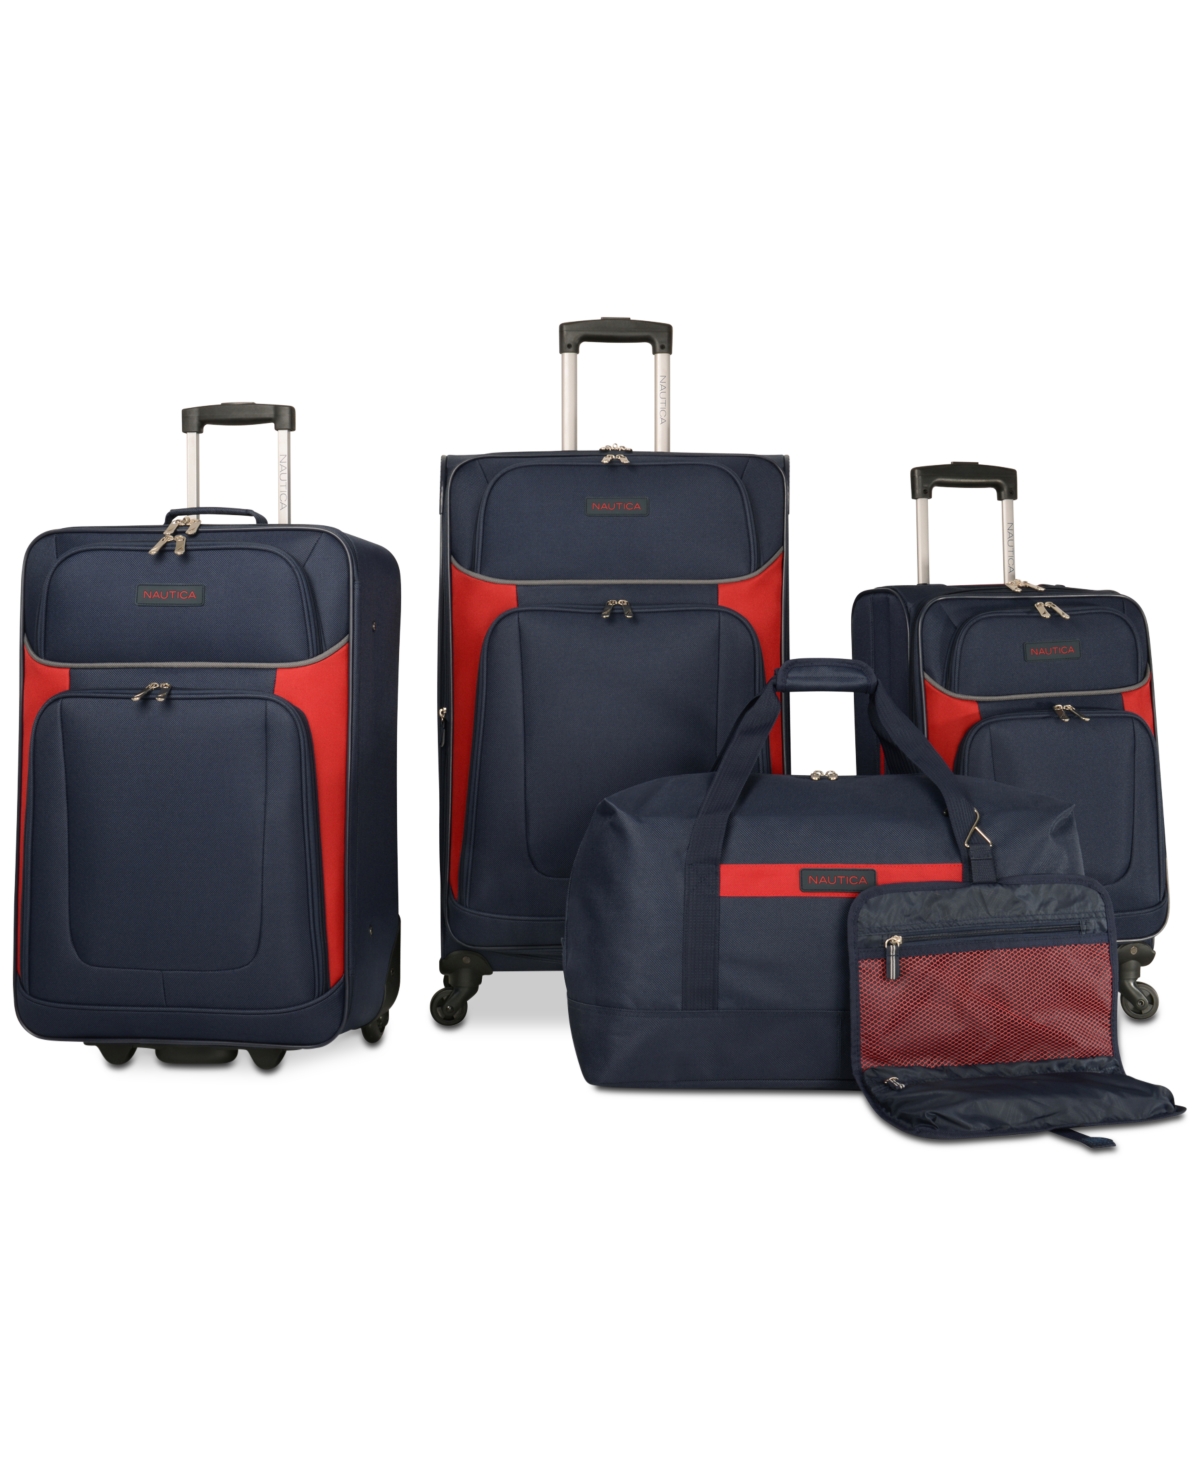 Oceanview 5-Pc. Luggage Set, Created for Macy's - Navy/Red